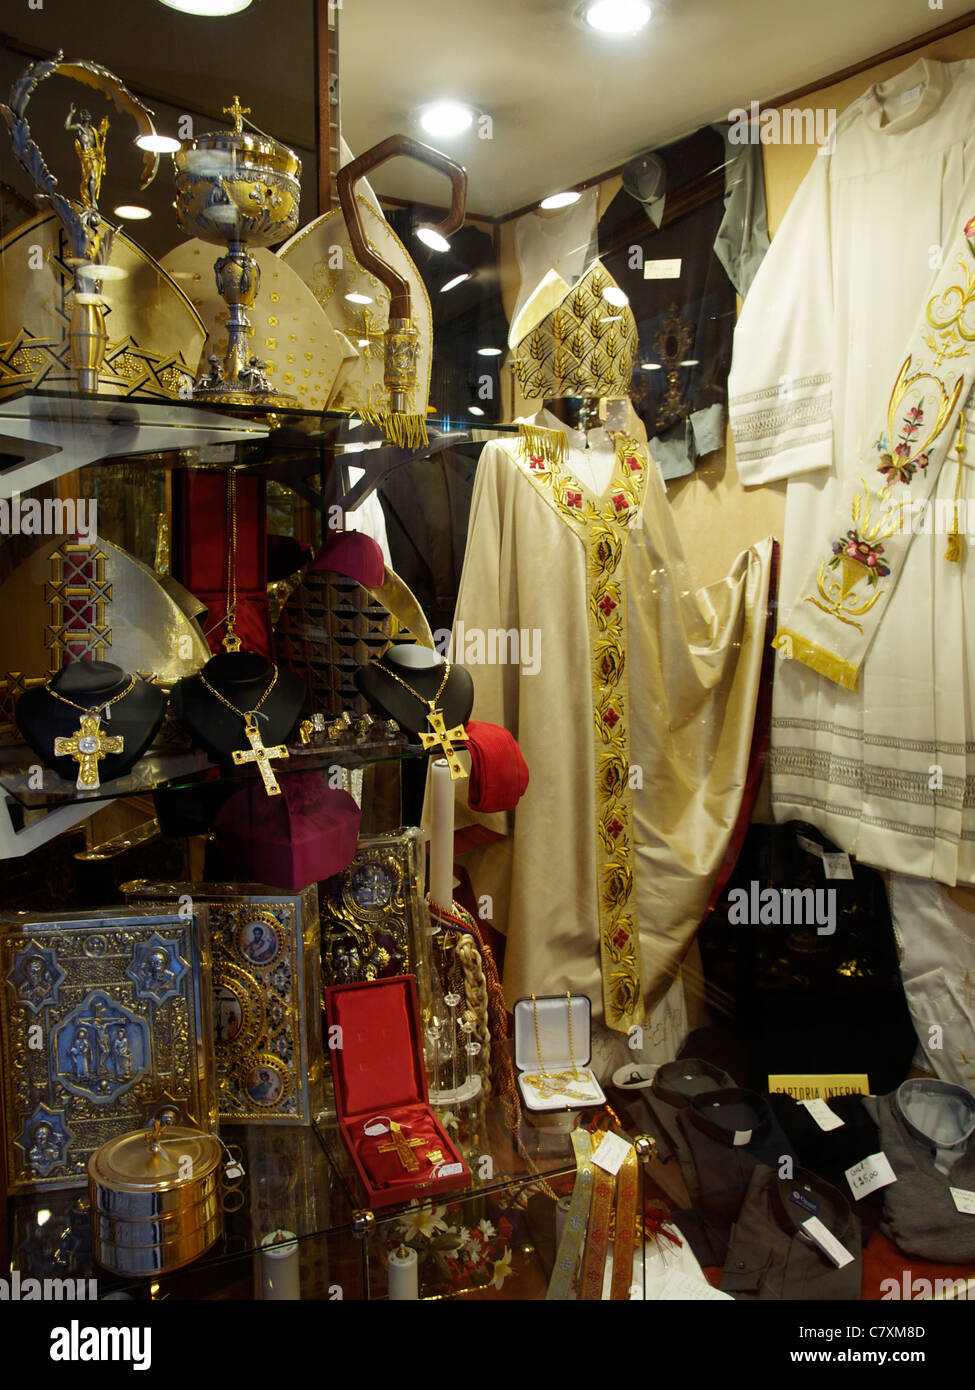 Even the Pope needs new clothes sometimes and close to the Vatican are shops that cater for his taste. Rome, Italy Stock Photo